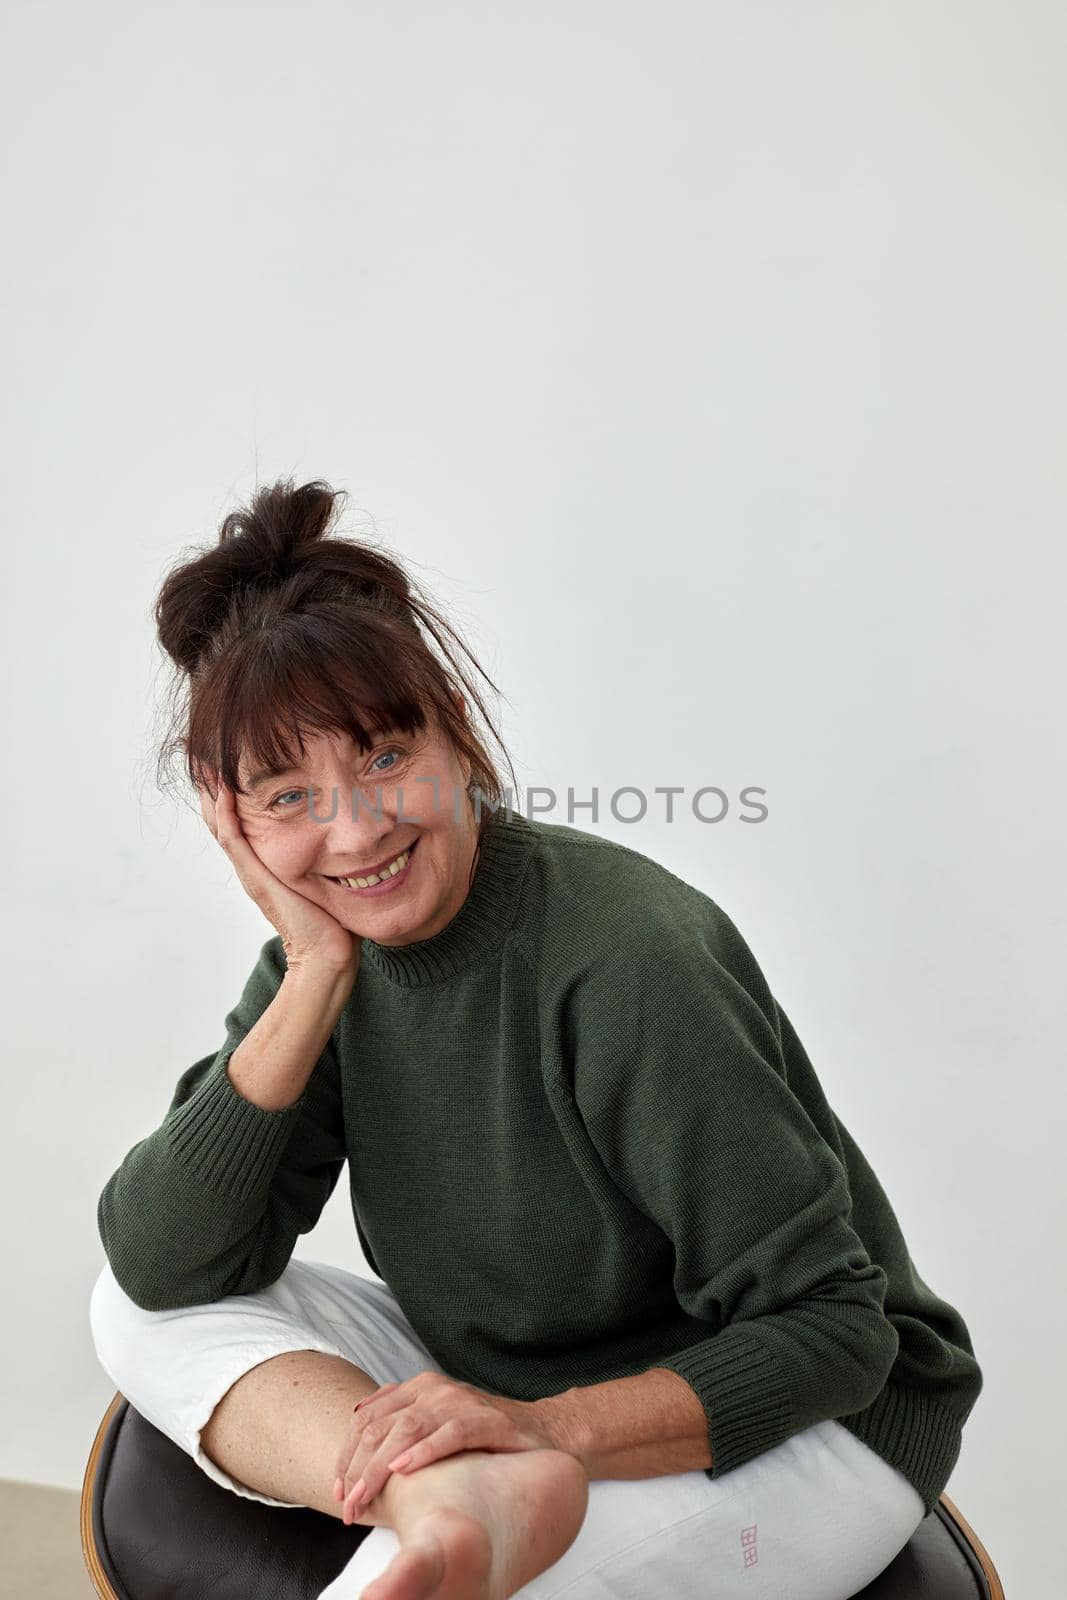 62 years old woman props her head with her hand and looks at the camera with a grin against a white wall background. Woman keep her head on hand